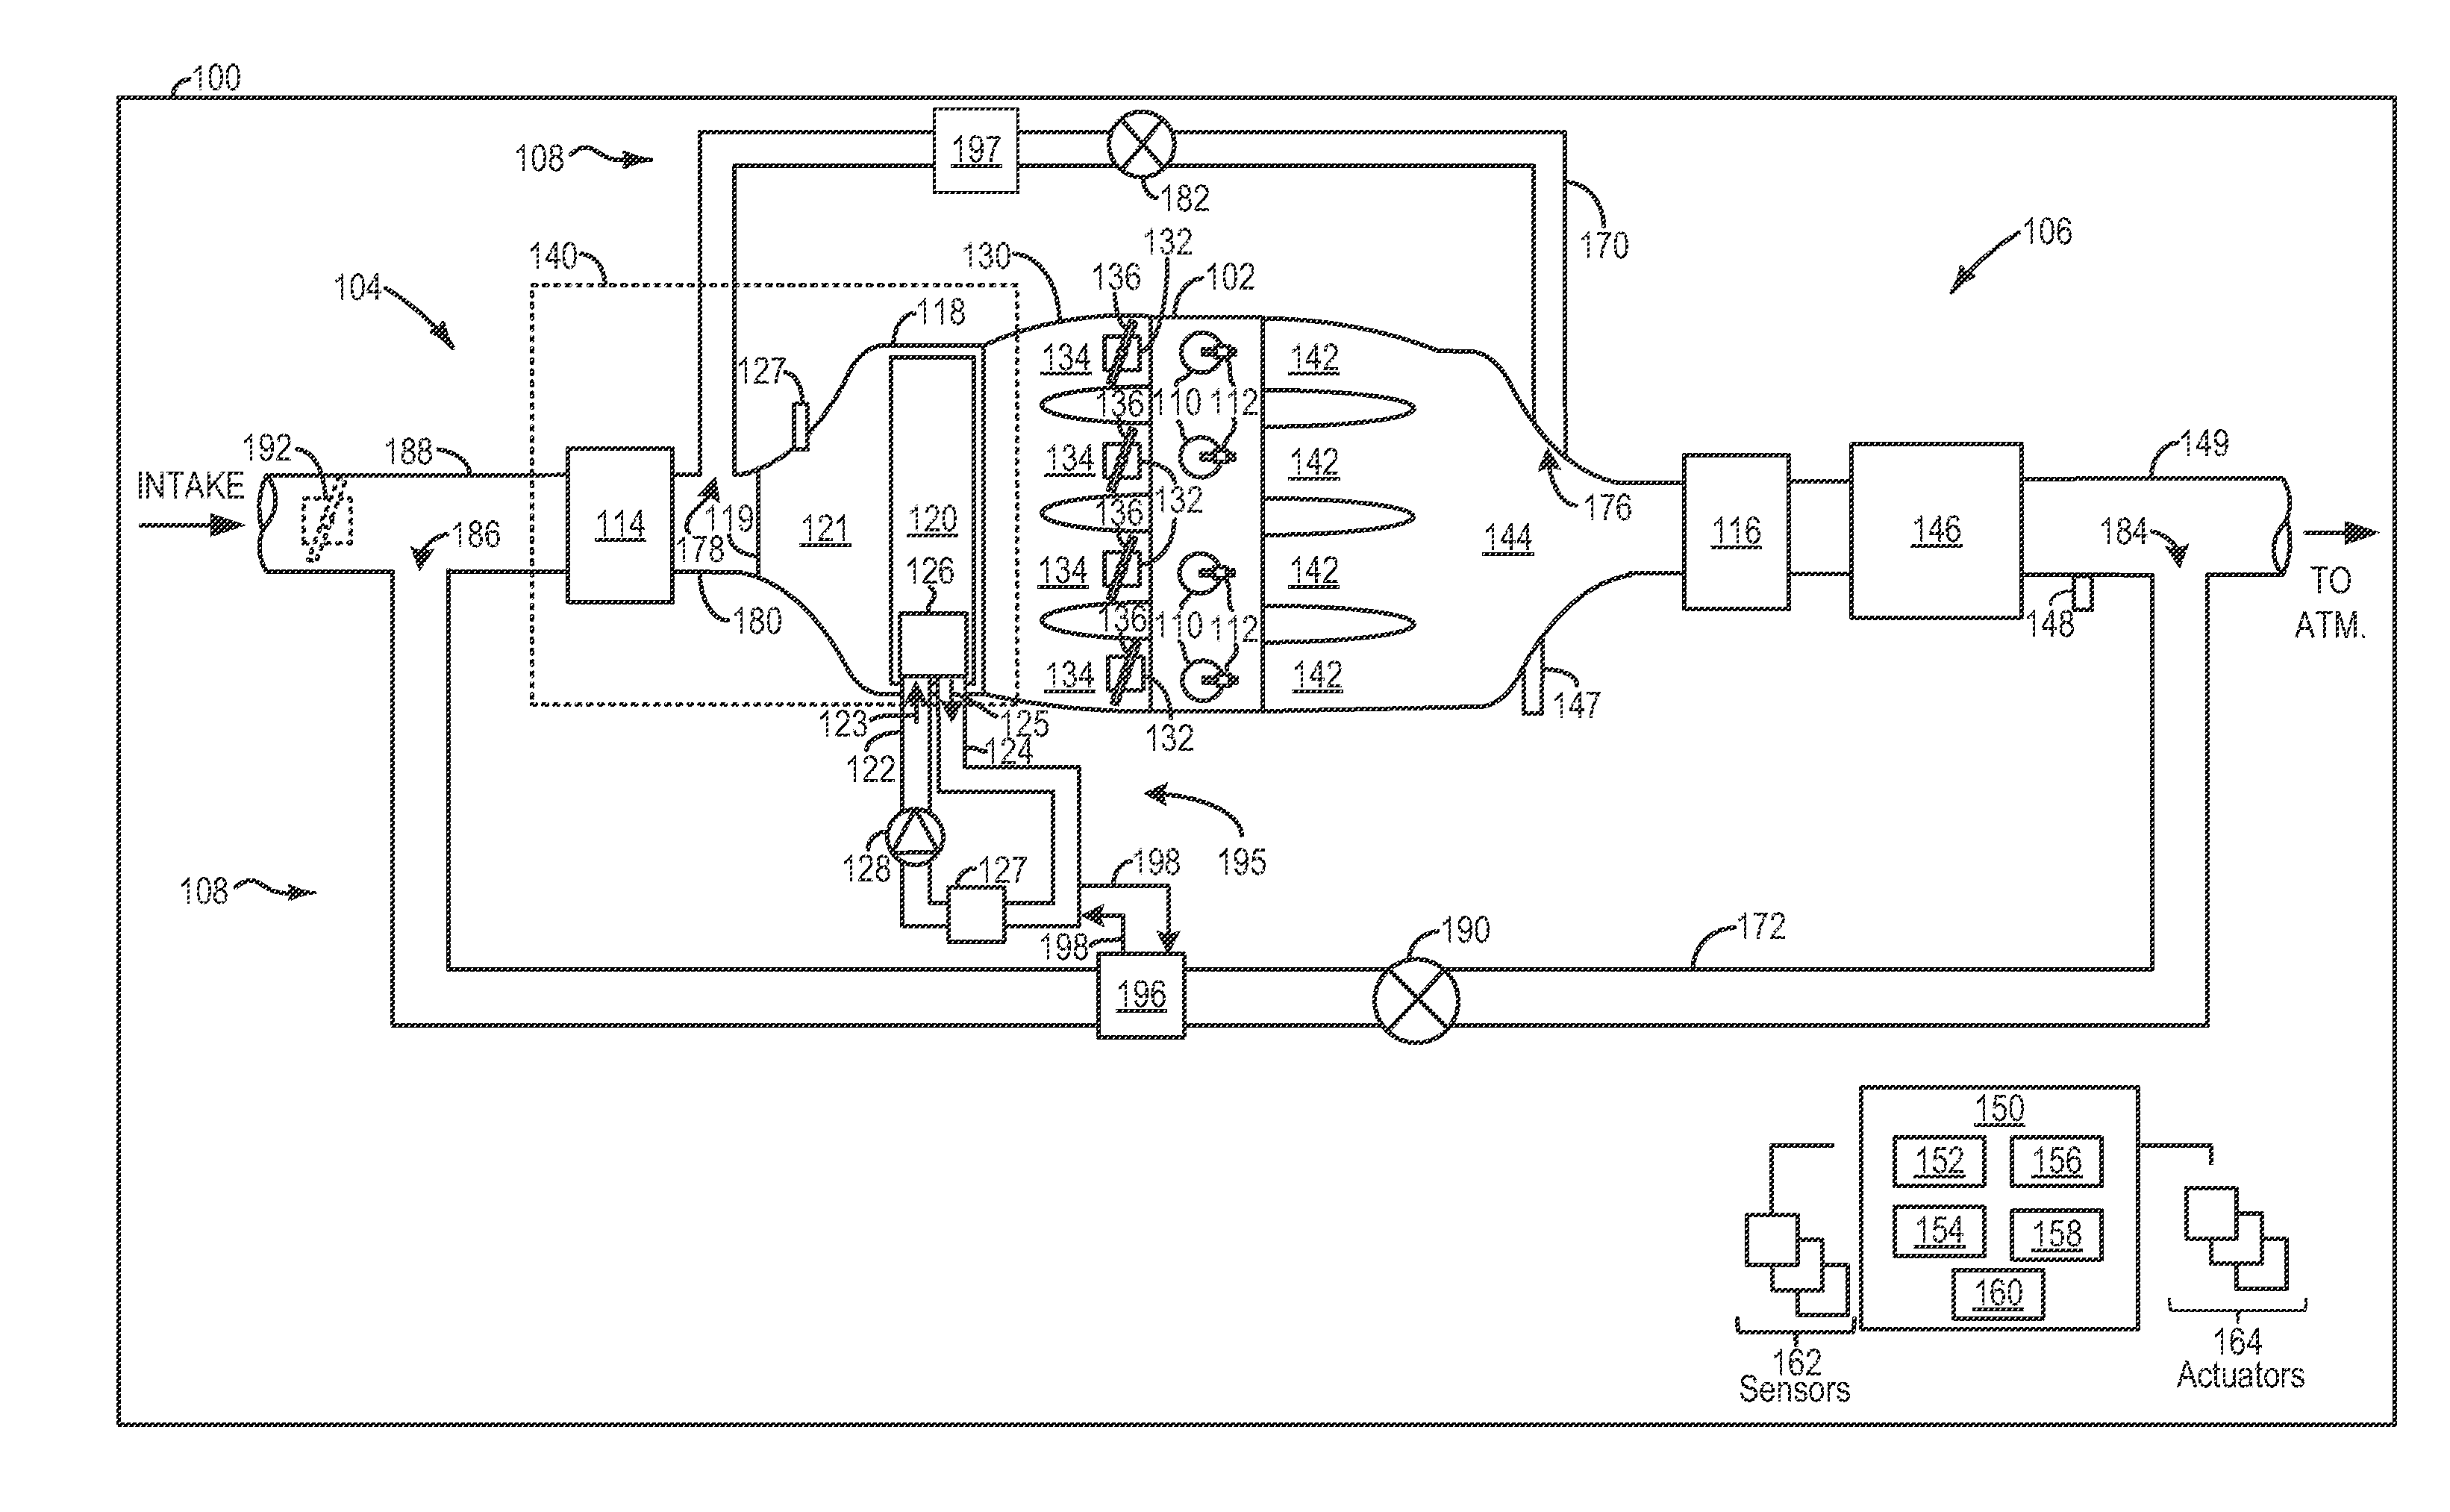 Intake system with an integrated charge air cooler